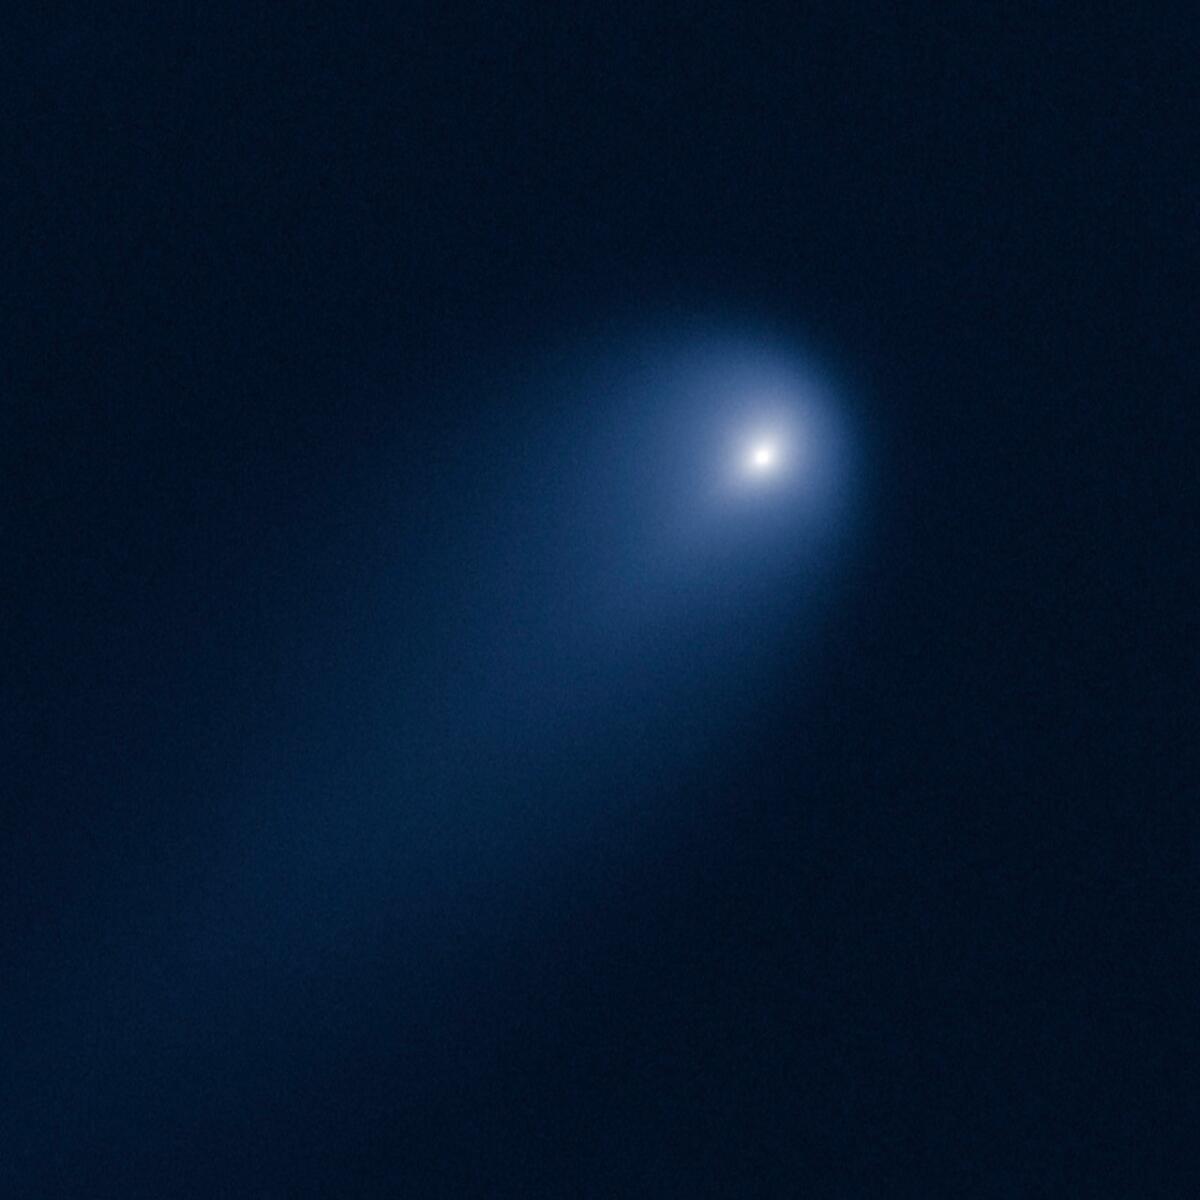 Comet ISON, which experts say may become "the comet of the century" by the time it approaches Earth in late November, is photographed April 10 by the Hubble Space Telescope.